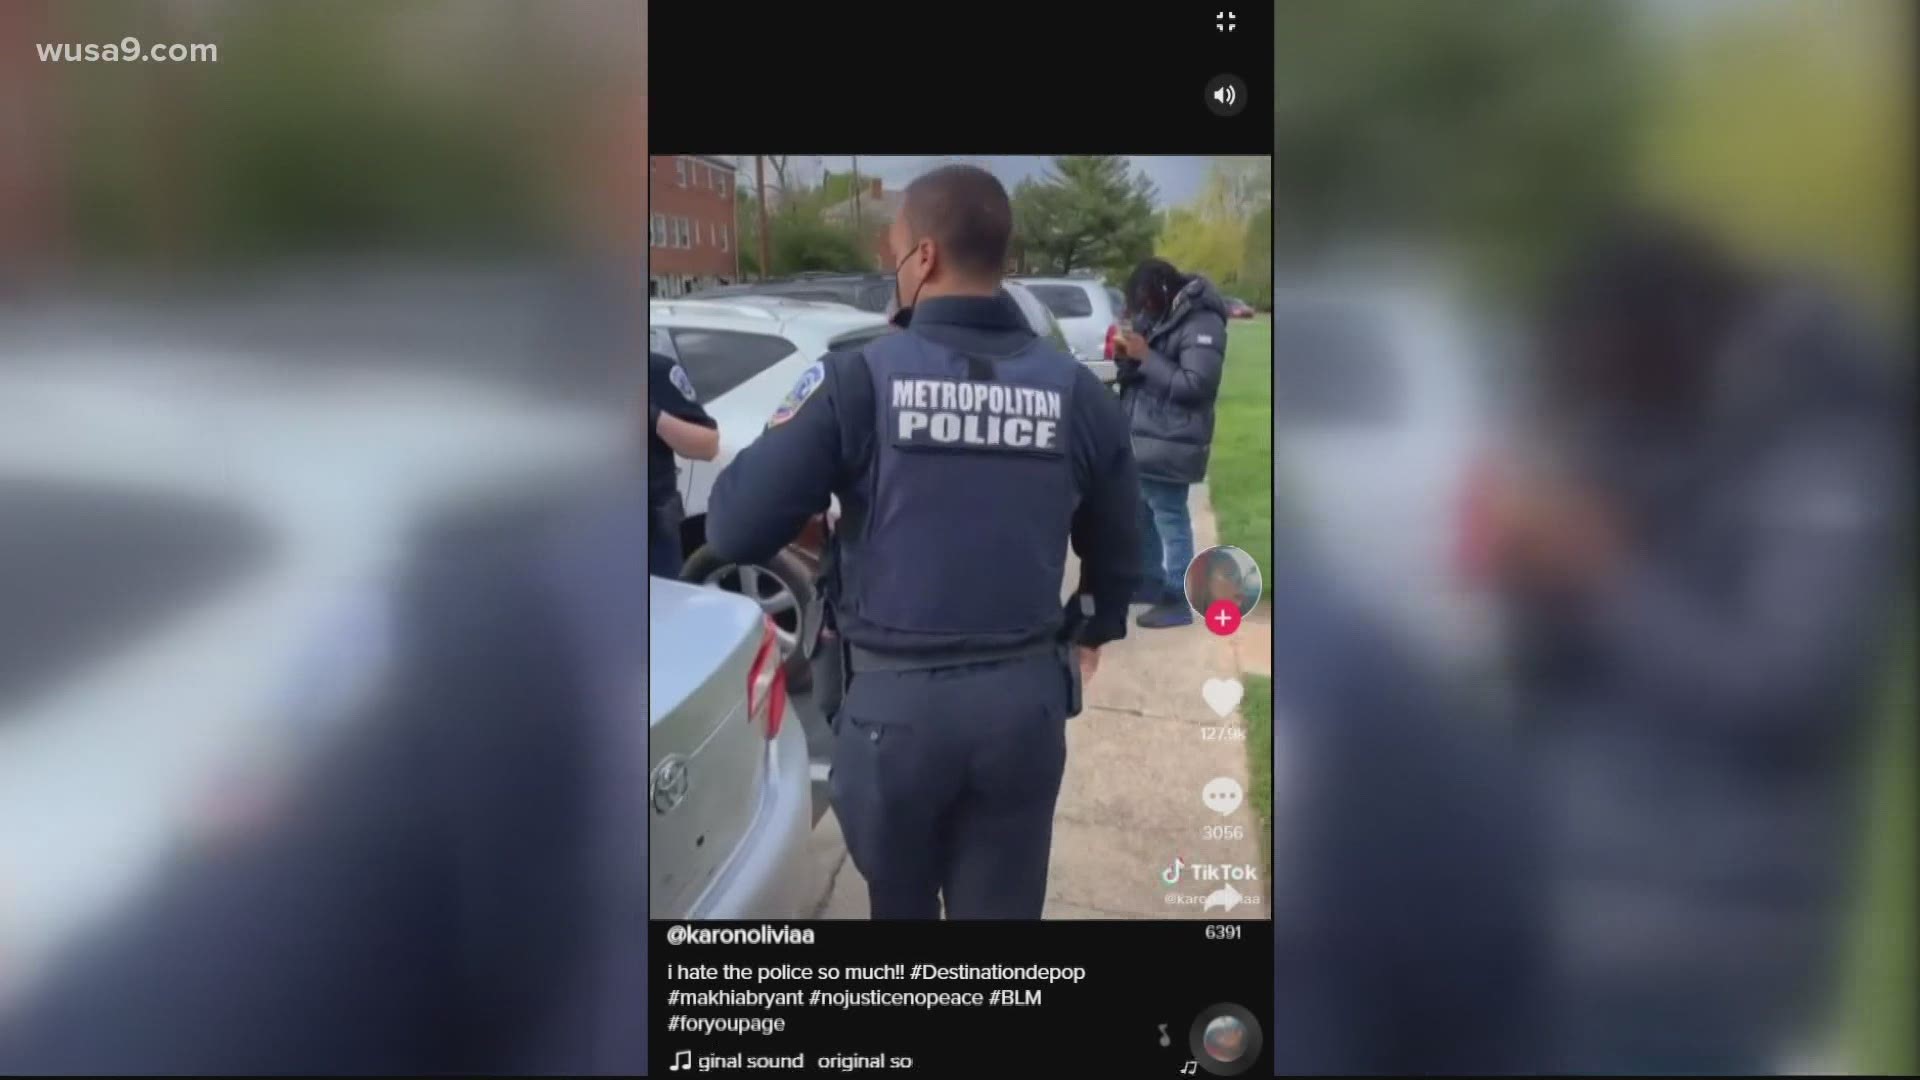 A popular Tik Tok video shows a man asking a DC police officer if they will kill him like Ma'Khia Bryant, The officer responds "Are you gonna stab somebody like her"